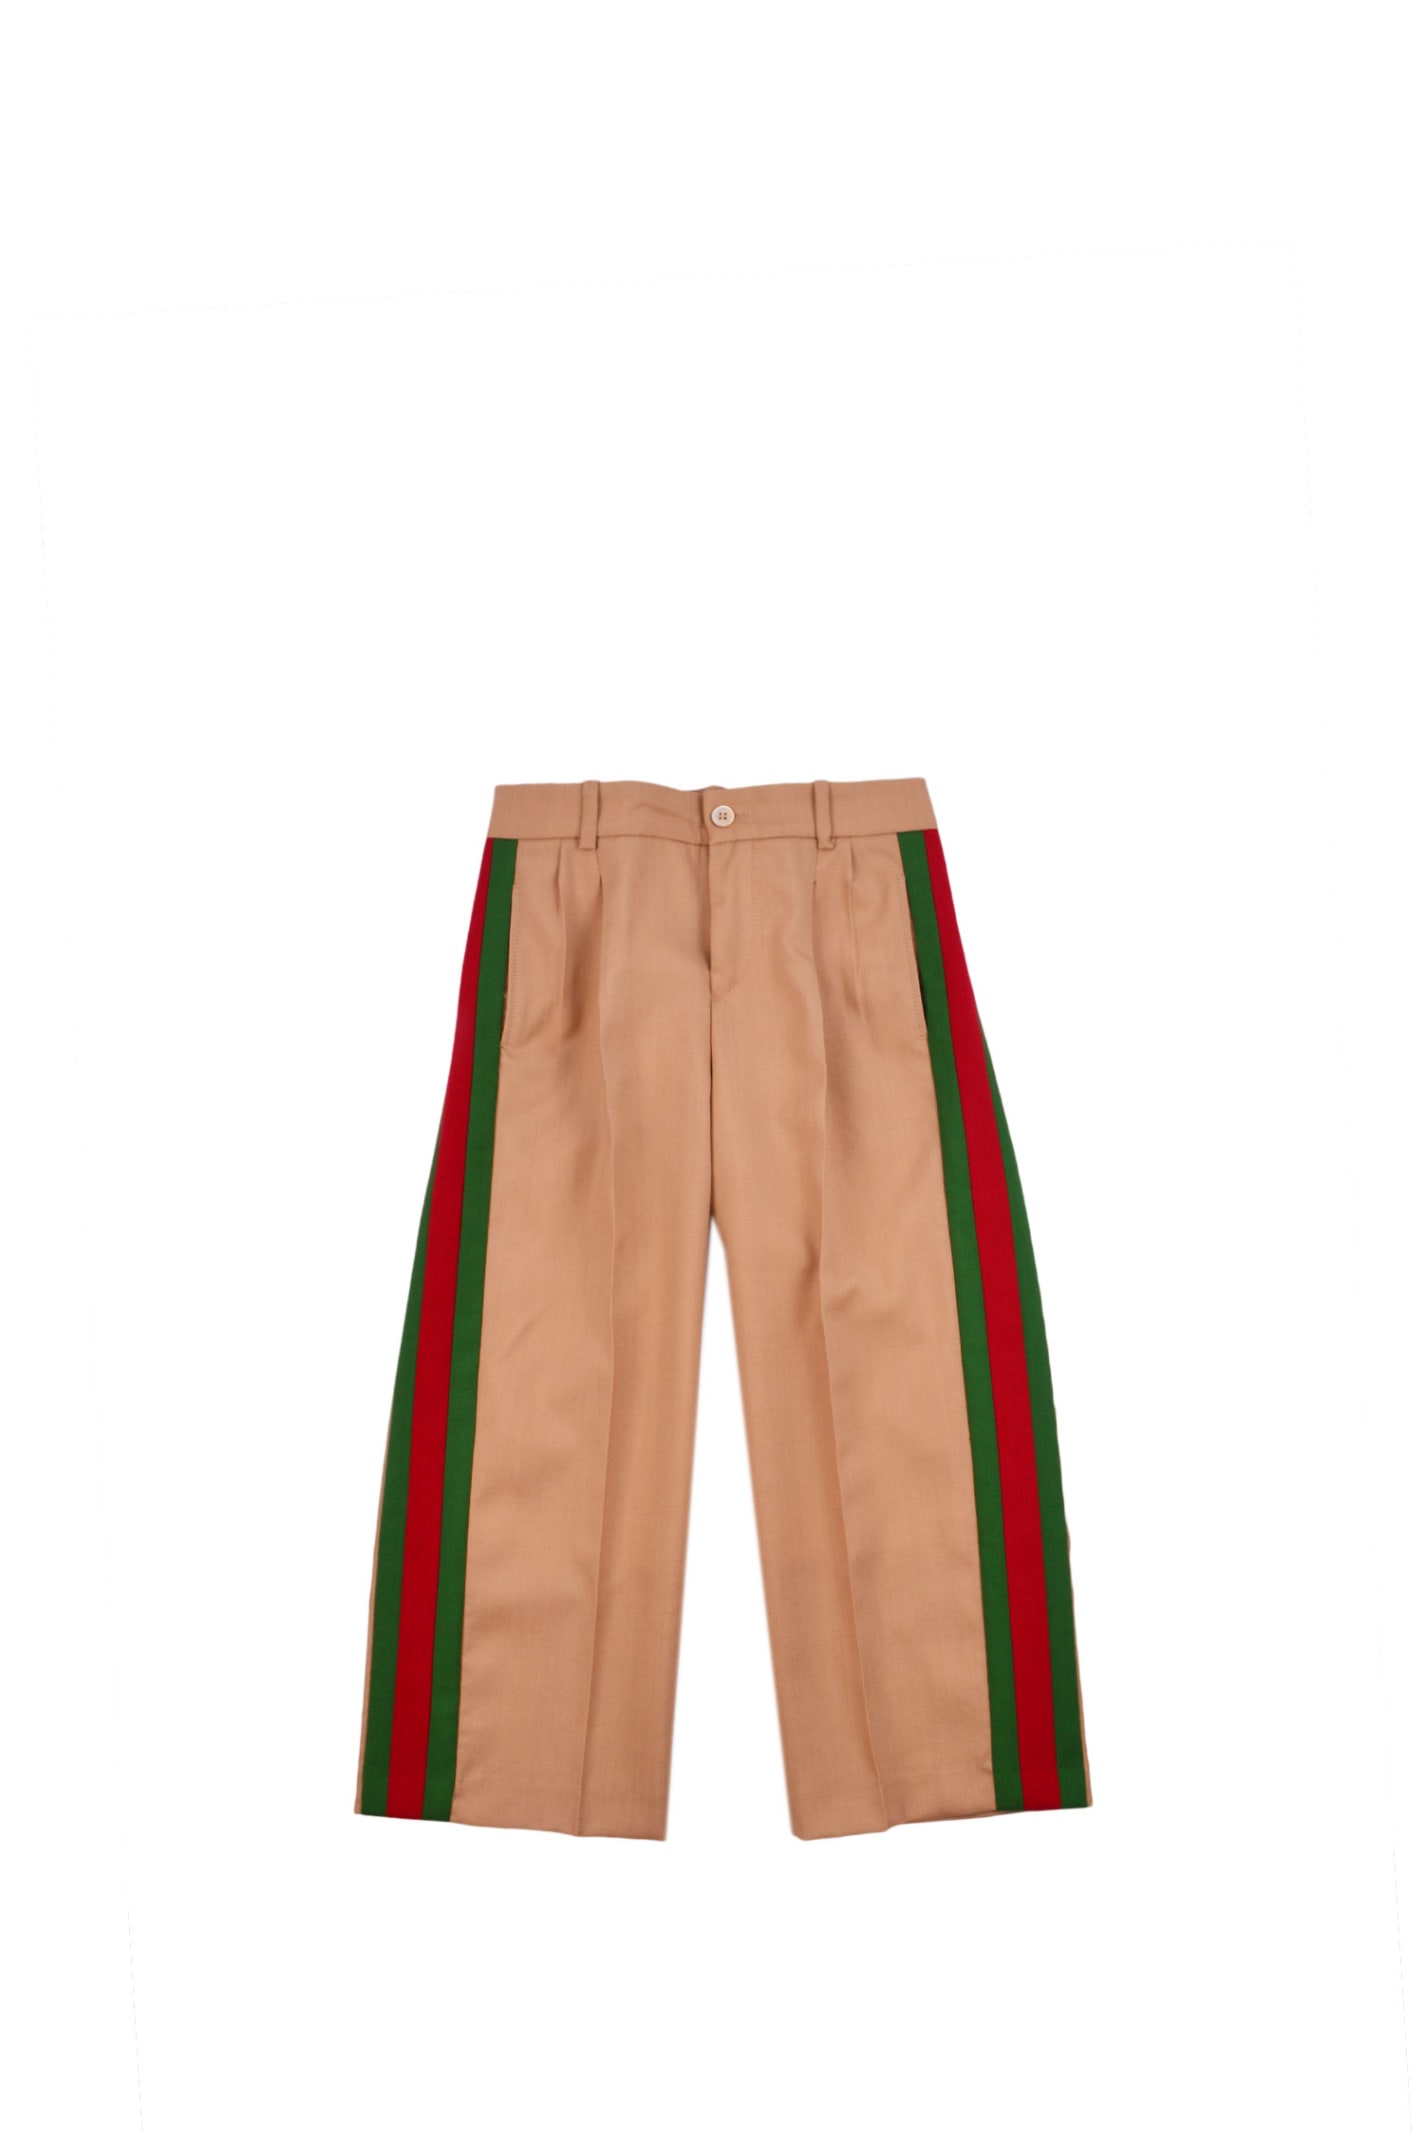 Gucci Cupro Trousers